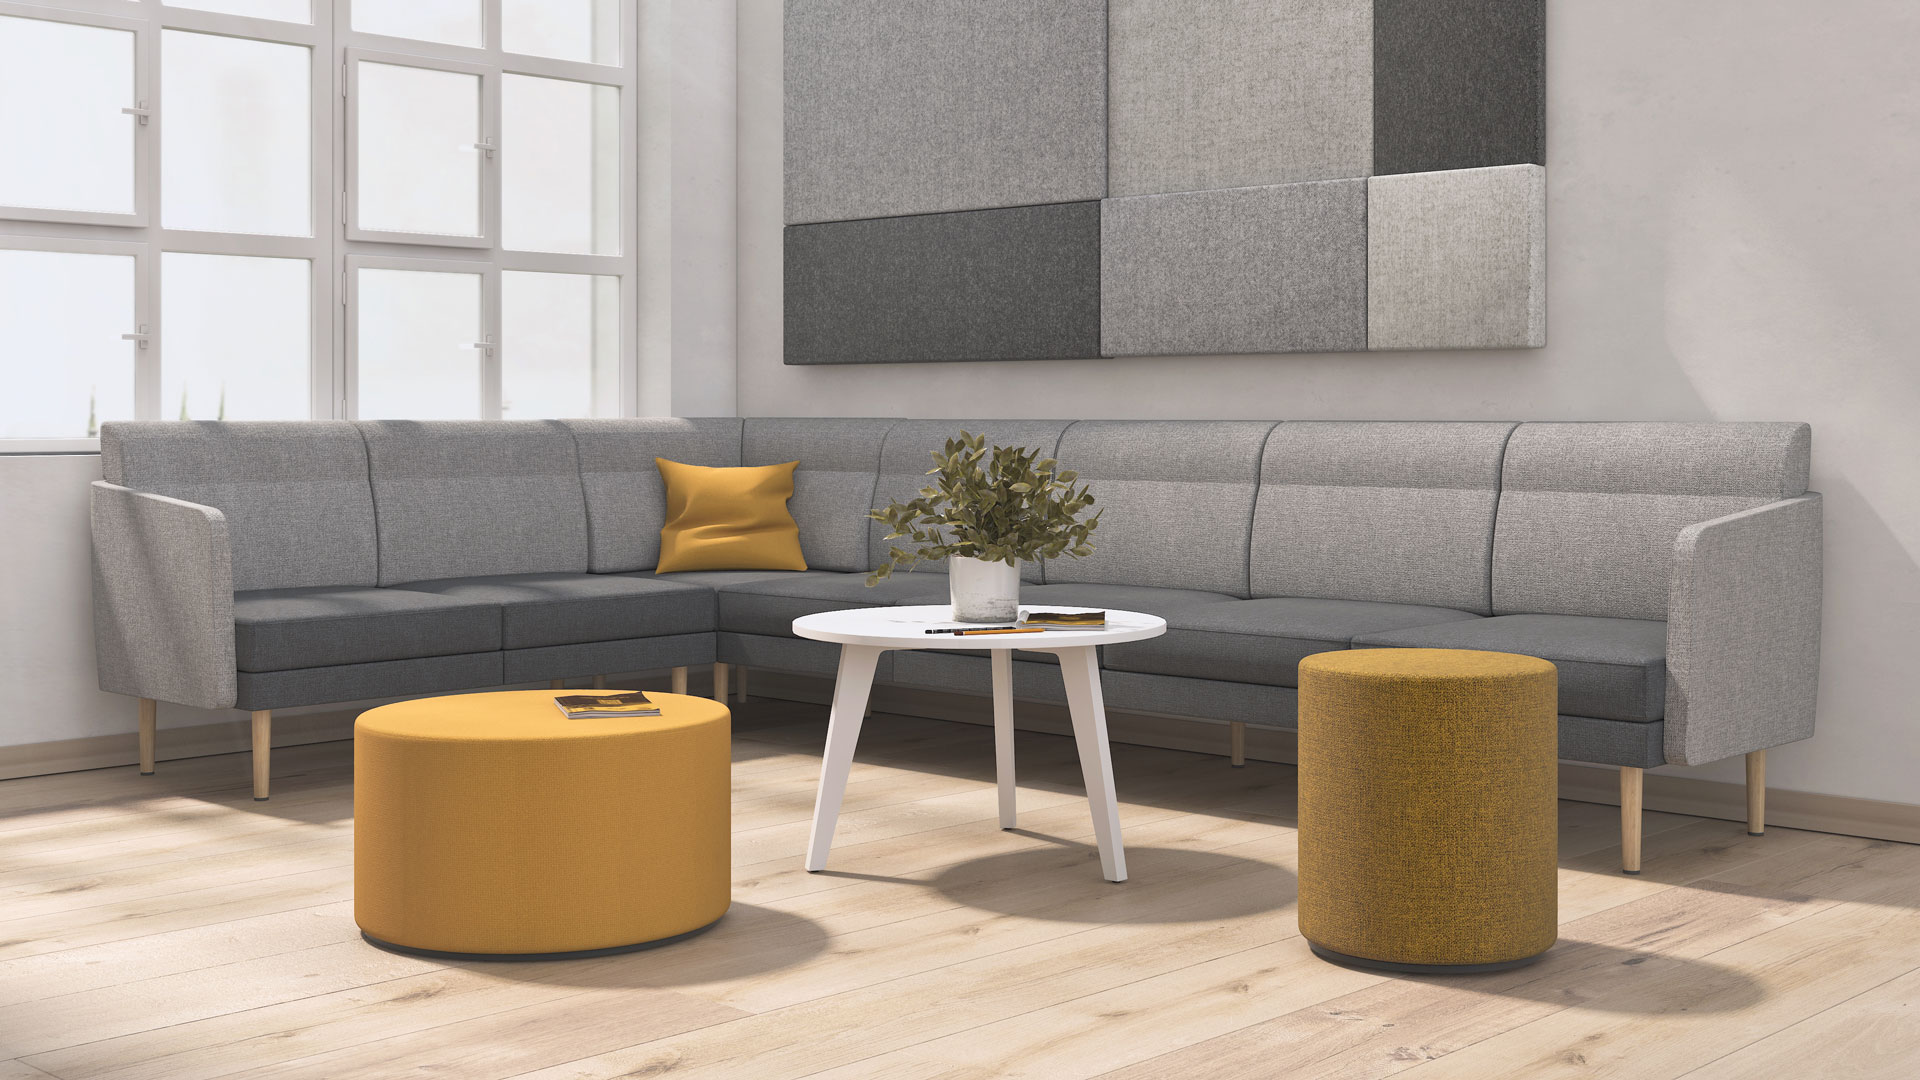 Combine Arcipelago with Giro poufs and Amber coffee tables